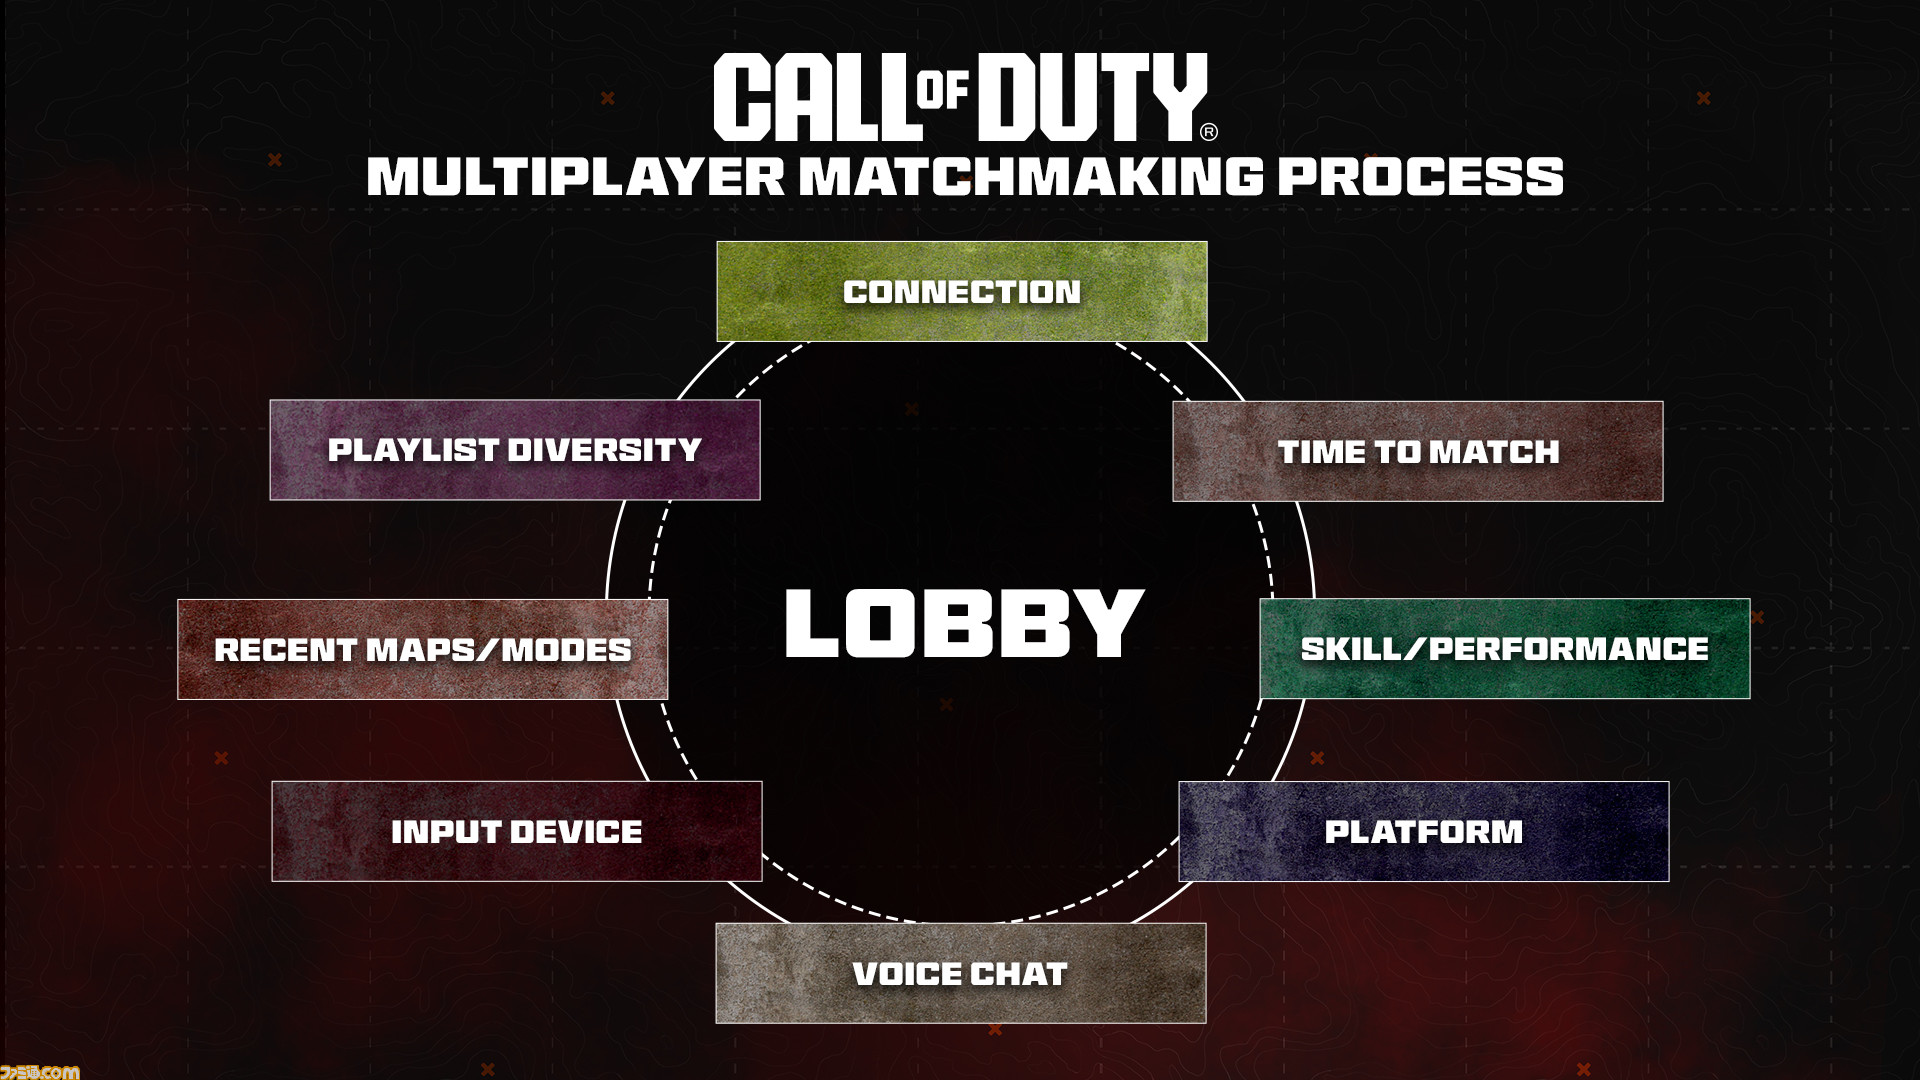 The official explanation of match-related elements in Call of Duty.  The biggest factor is not the skill but the state of communication  Famitsu.com for the latest information about gaming and entertainment